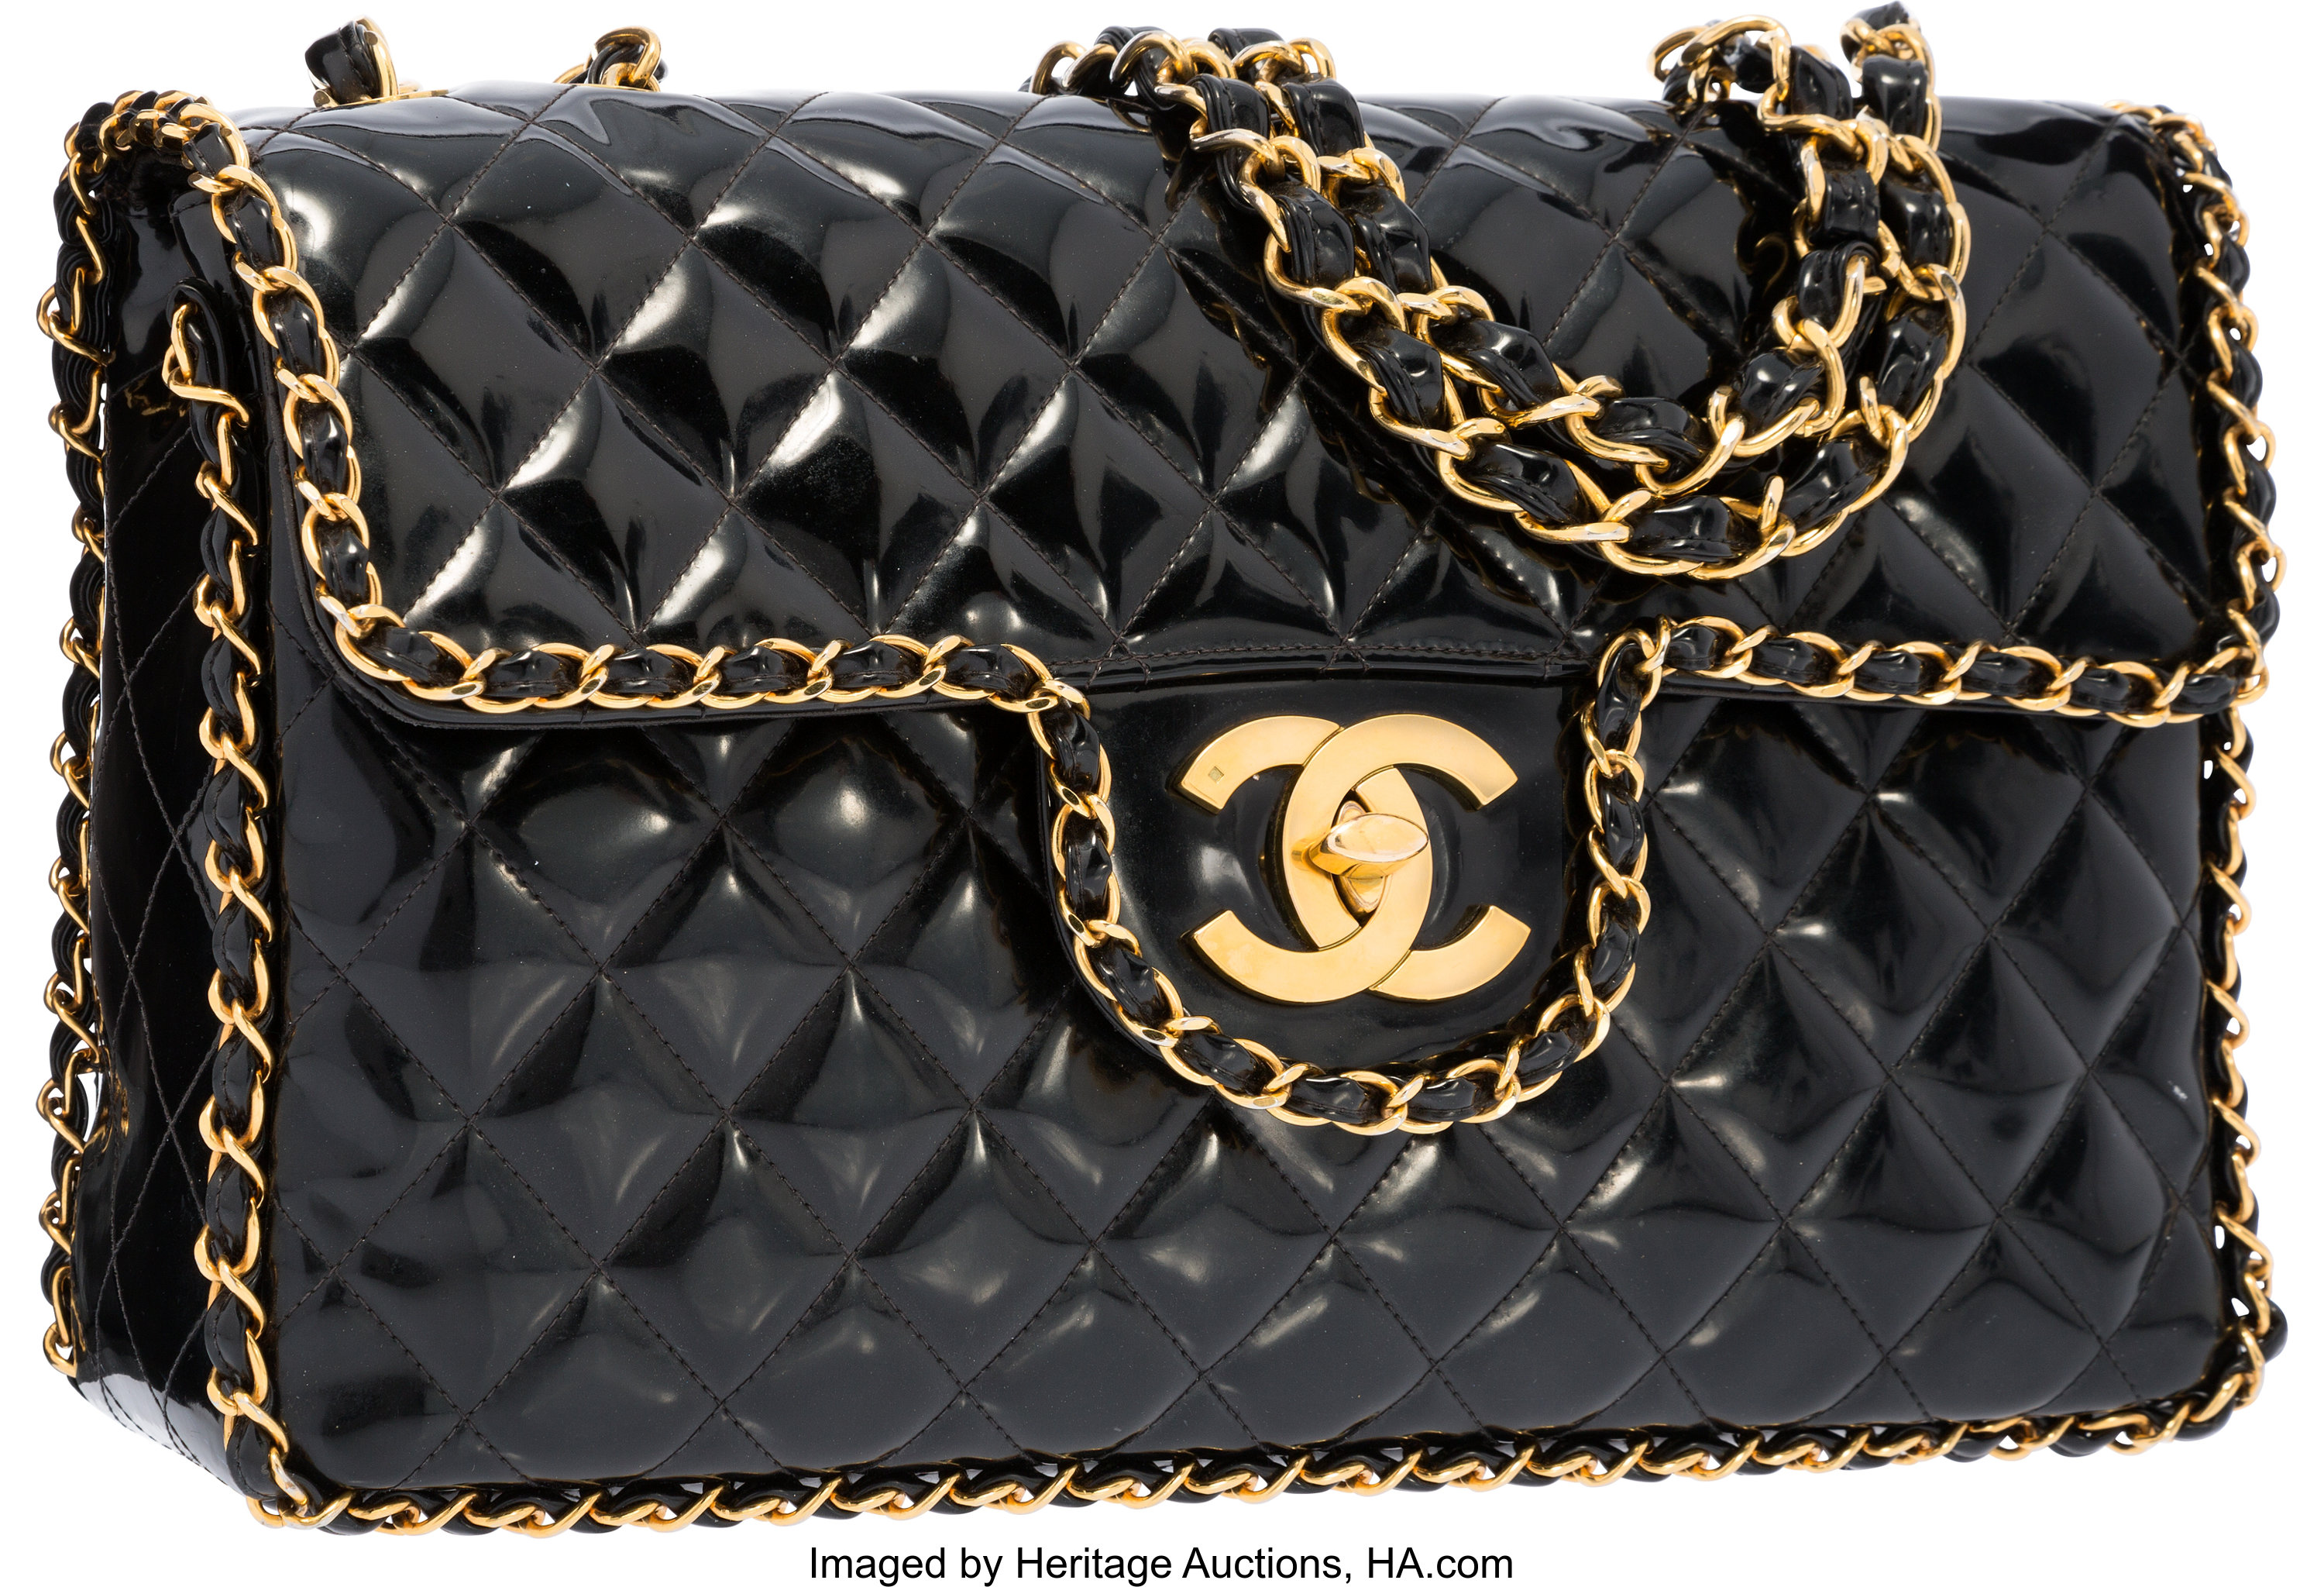 A BLACK PATENT LEATHER CHAIN AROUND MAXI FLAP BAG WITH GOLD HARDWARE